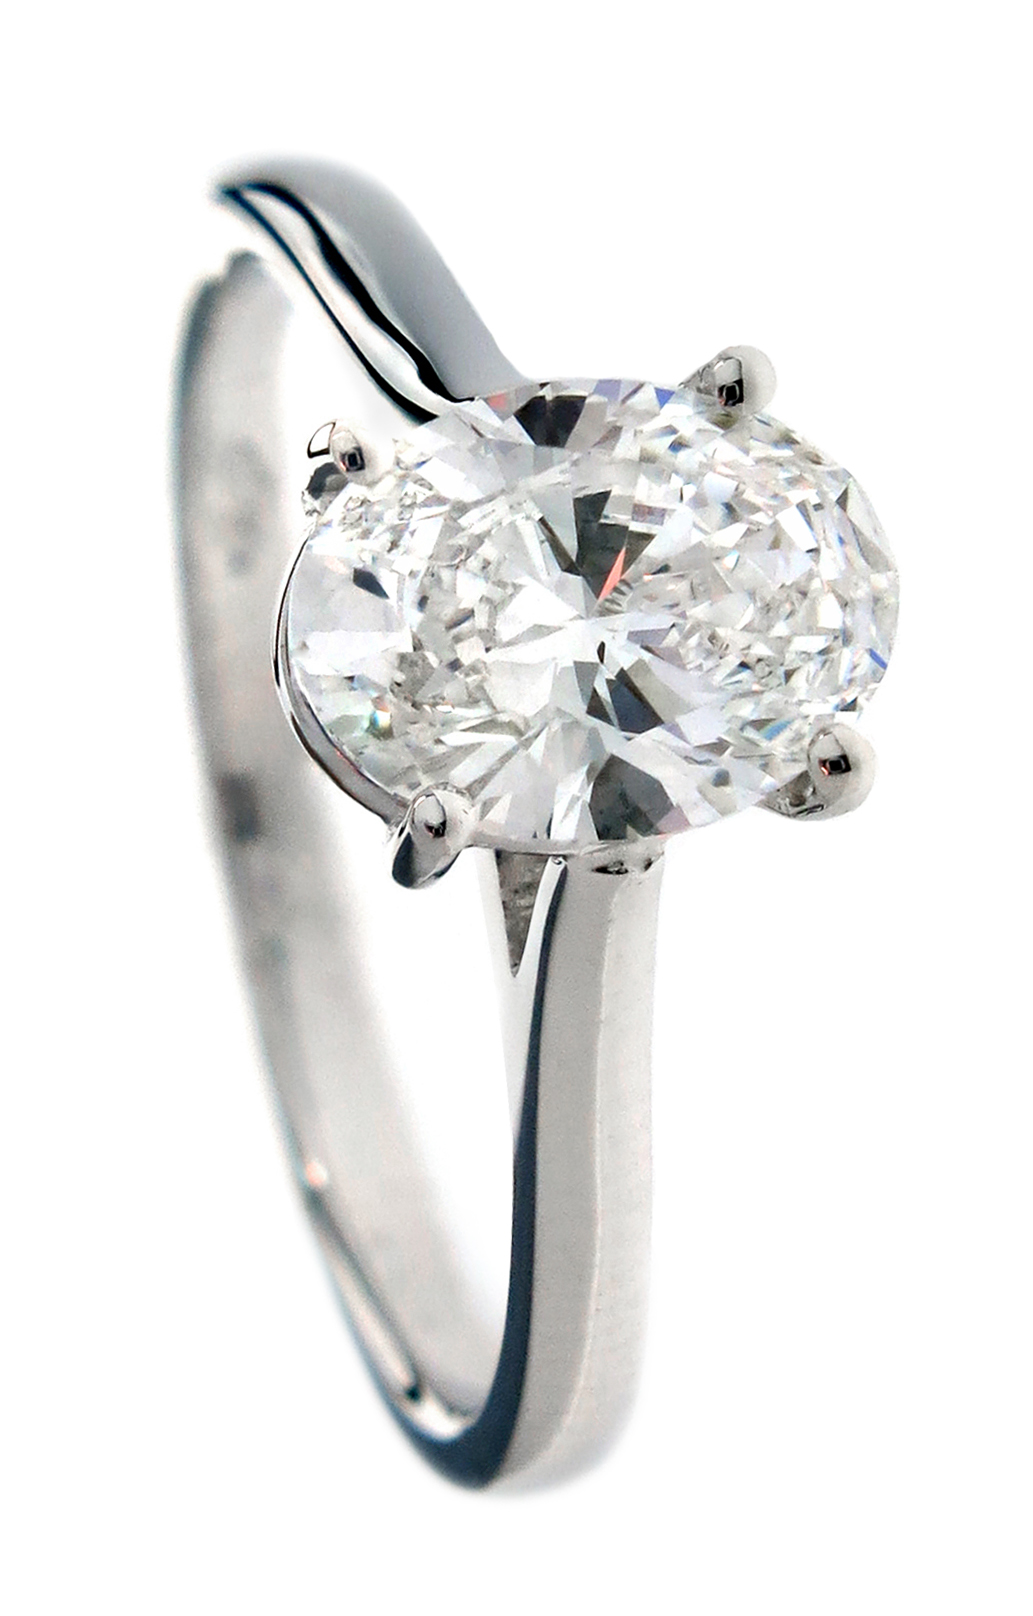 Oval cut solitaire diamond engagement ring